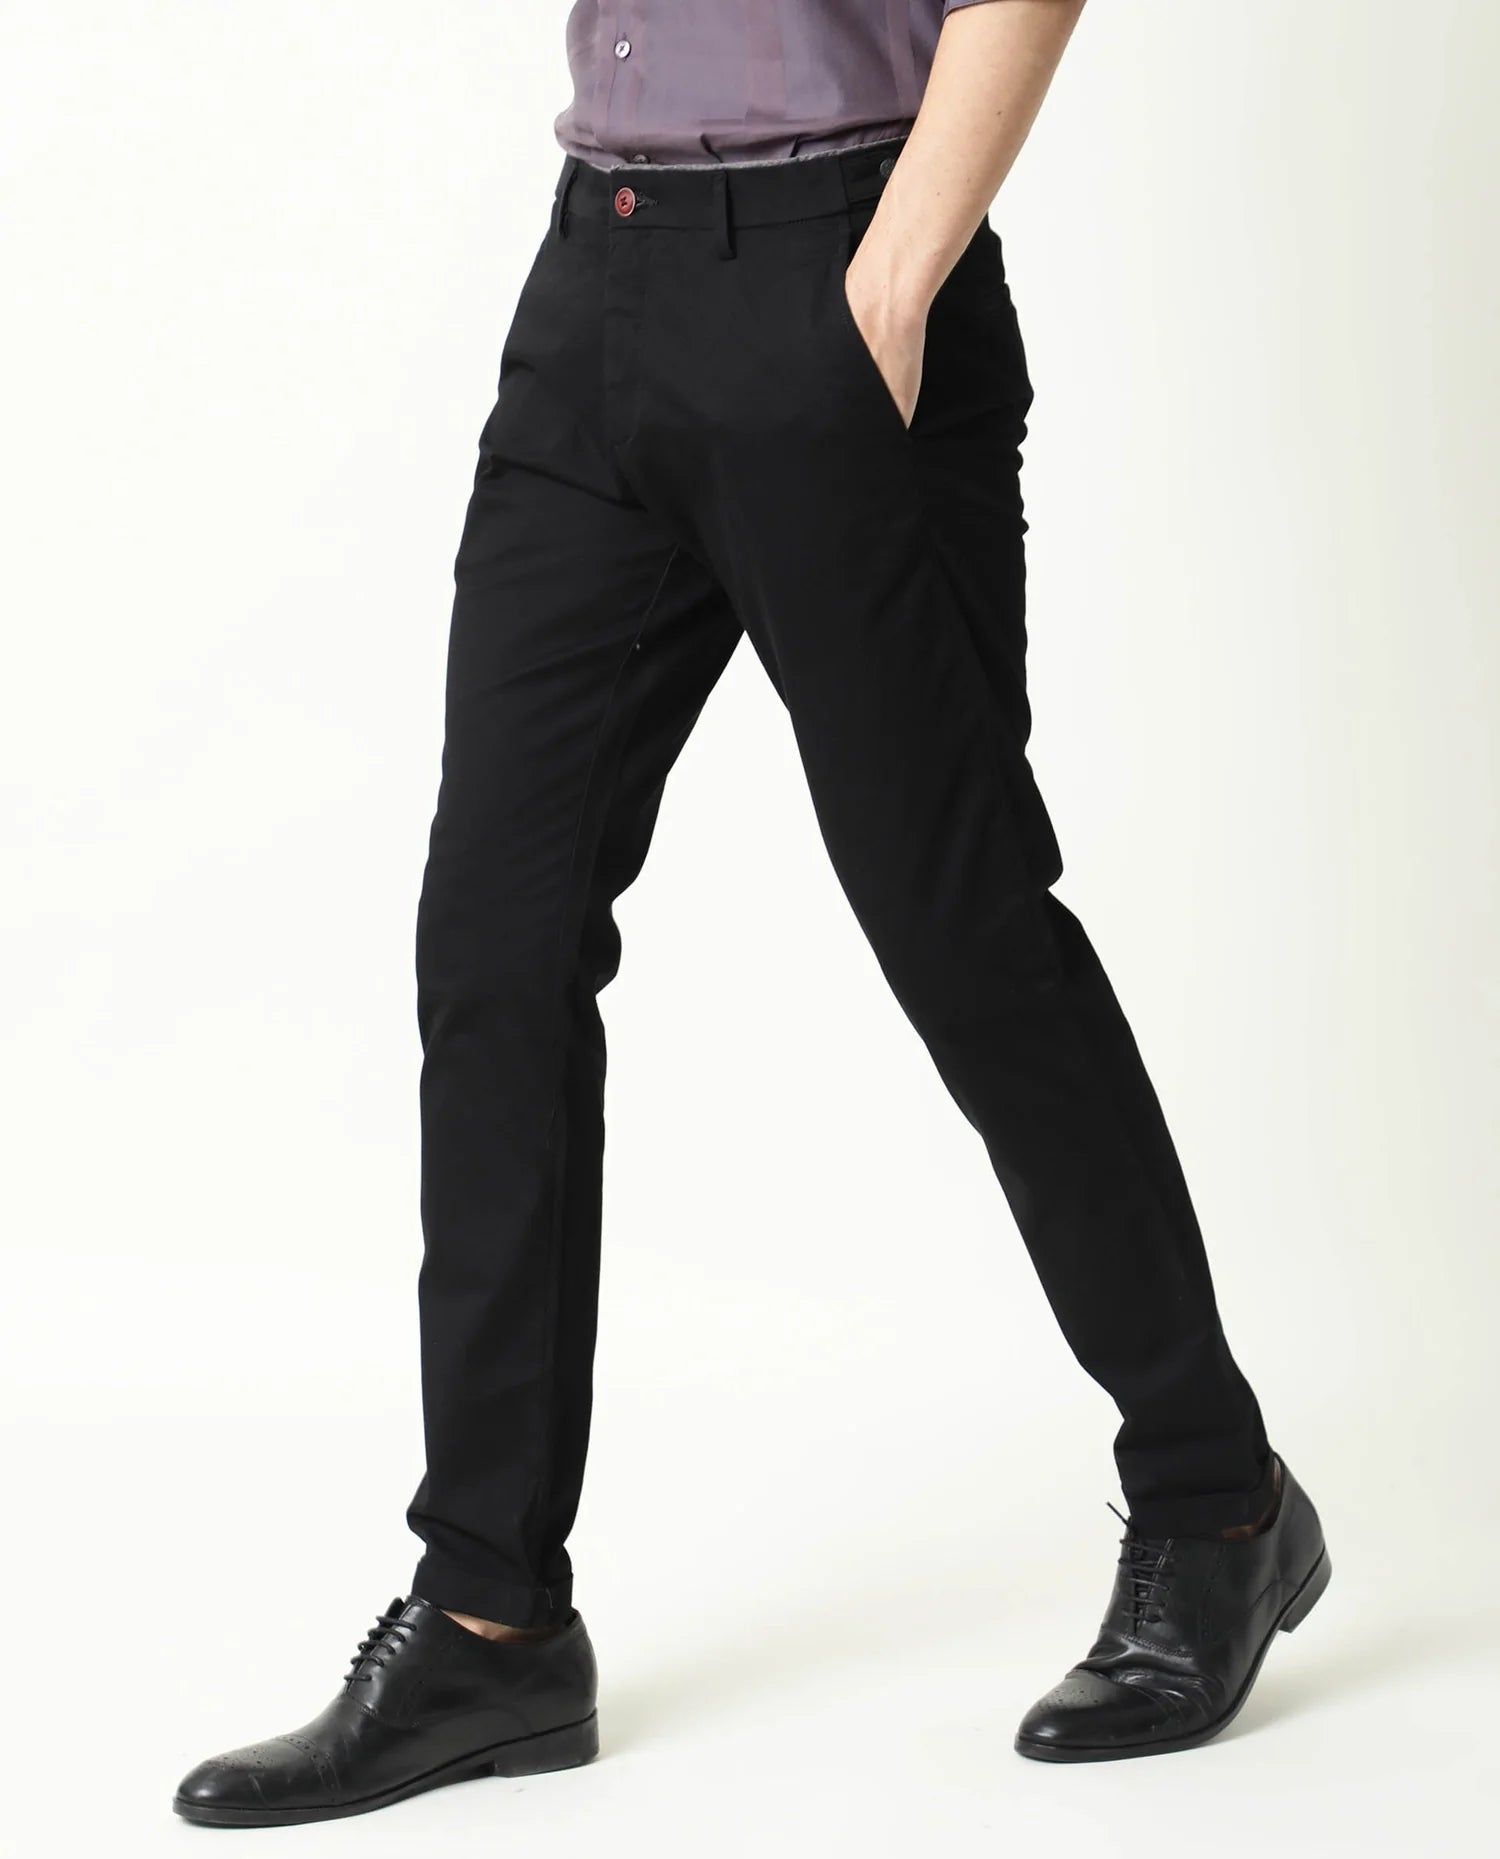 Black Solid Killer Mens Cotton Lycra Trouser, Slim Fit at Rs 790 in Lucknow